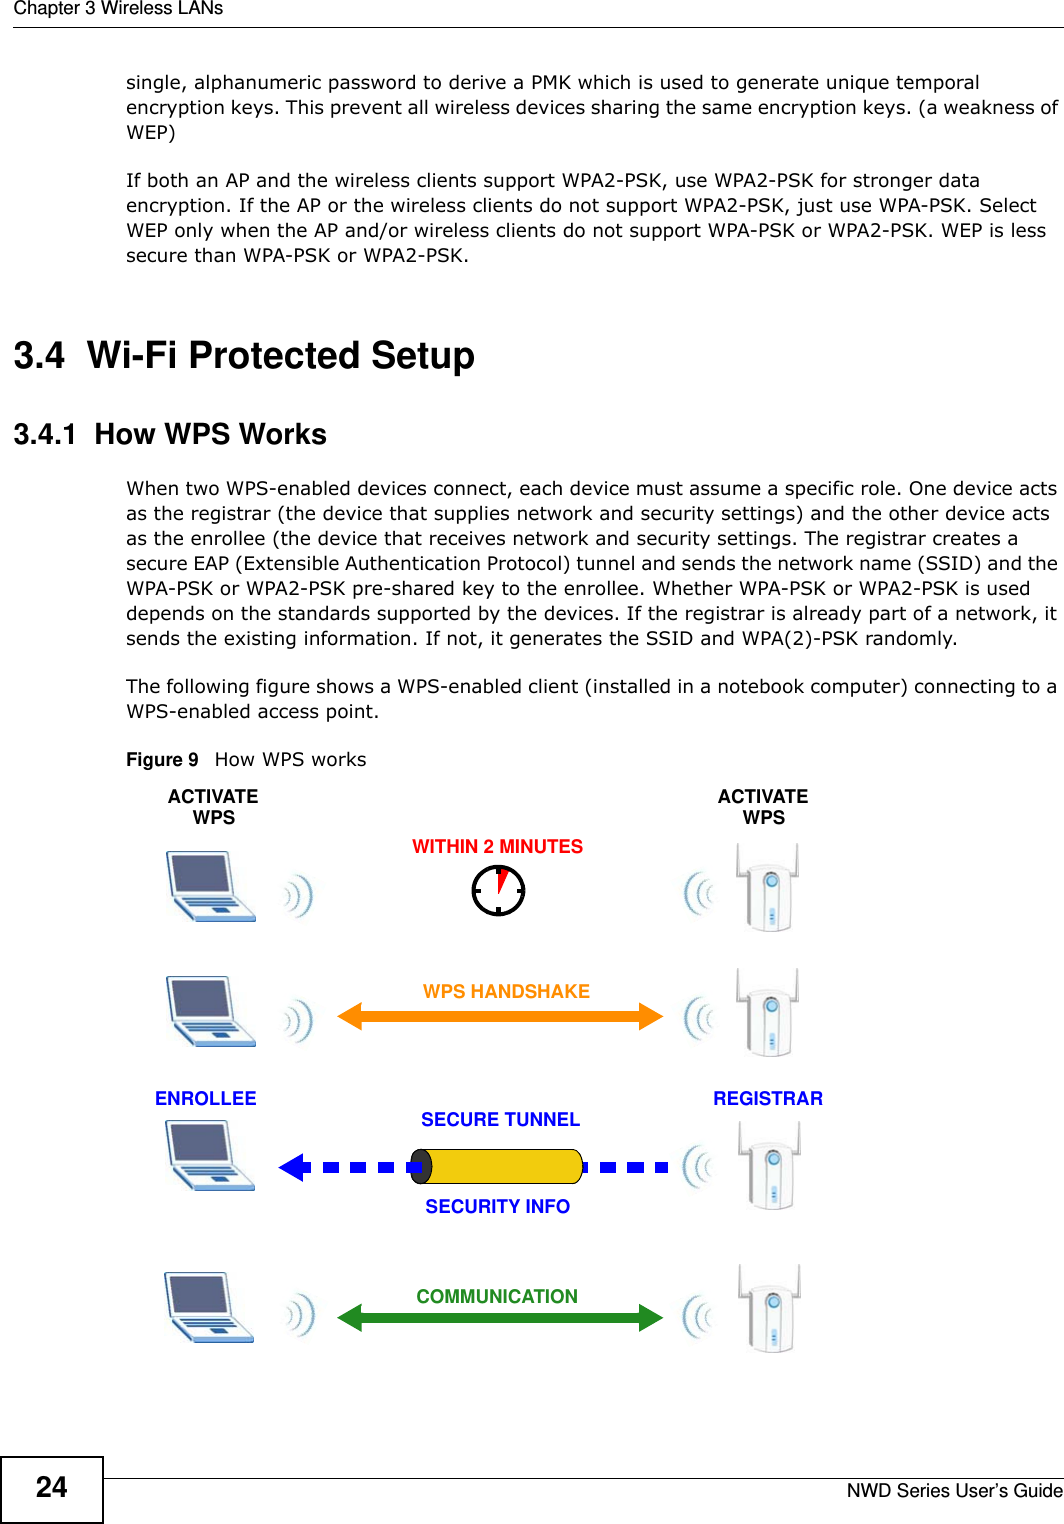 Chapter 3 Wireless LANsNWD Series User’s Guide24single, alphanumeric password to derive a PMK which is used to generate unique temporal encryption keys. This prevent all wireless devices sharing the same encryption keys. (a weakness of WEP)If both an AP and the wireless clients support WPA2-PSK, use WPA2-PSK for stronger data encryption. If the AP or the wireless clients do not support WPA2-PSK, just use WPA-PSK. Select WEP only when the AP and/or wireless clients do not support WPA-PSK or WPA2-PSK. WEP is less secure than WPA-PSK or WPA2-PSK.3.4  Wi-Fi Protected Setup3.4.1  How WPS WorksWhen two WPS-enabled devices connect, each device must assume a specific role. One device acts as the registrar (the device that supplies network and security settings) and the other device acts as the enrollee (the device that receives network and security settings. The registrar creates a secure EAP (Extensible Authentication Protocol) tunnel and sends the network name (SSID) and the WPA-PSK or WPA2-PSK pre-shared key to the enrollee. Whether WPA-PSK or WPA2-PSK is used depends on the standards supported by the devices. If the registrar is already part of a network, it sends the existing information. If not, it generates the SSID and WPA(2)-PSK randomly.The following figure shows a WPS-enabled client (installed in a notebook computer) connecting to a WPS-enabled access point.Figure 9   How WPS worksSECURE TUNNELSECURITY INFOWITHIN 2 MINUTESCOMMUNICATIONACTIVATEWPSACTIVATEWPSWPS HANDSHAKEREGISTRARENROLLEE